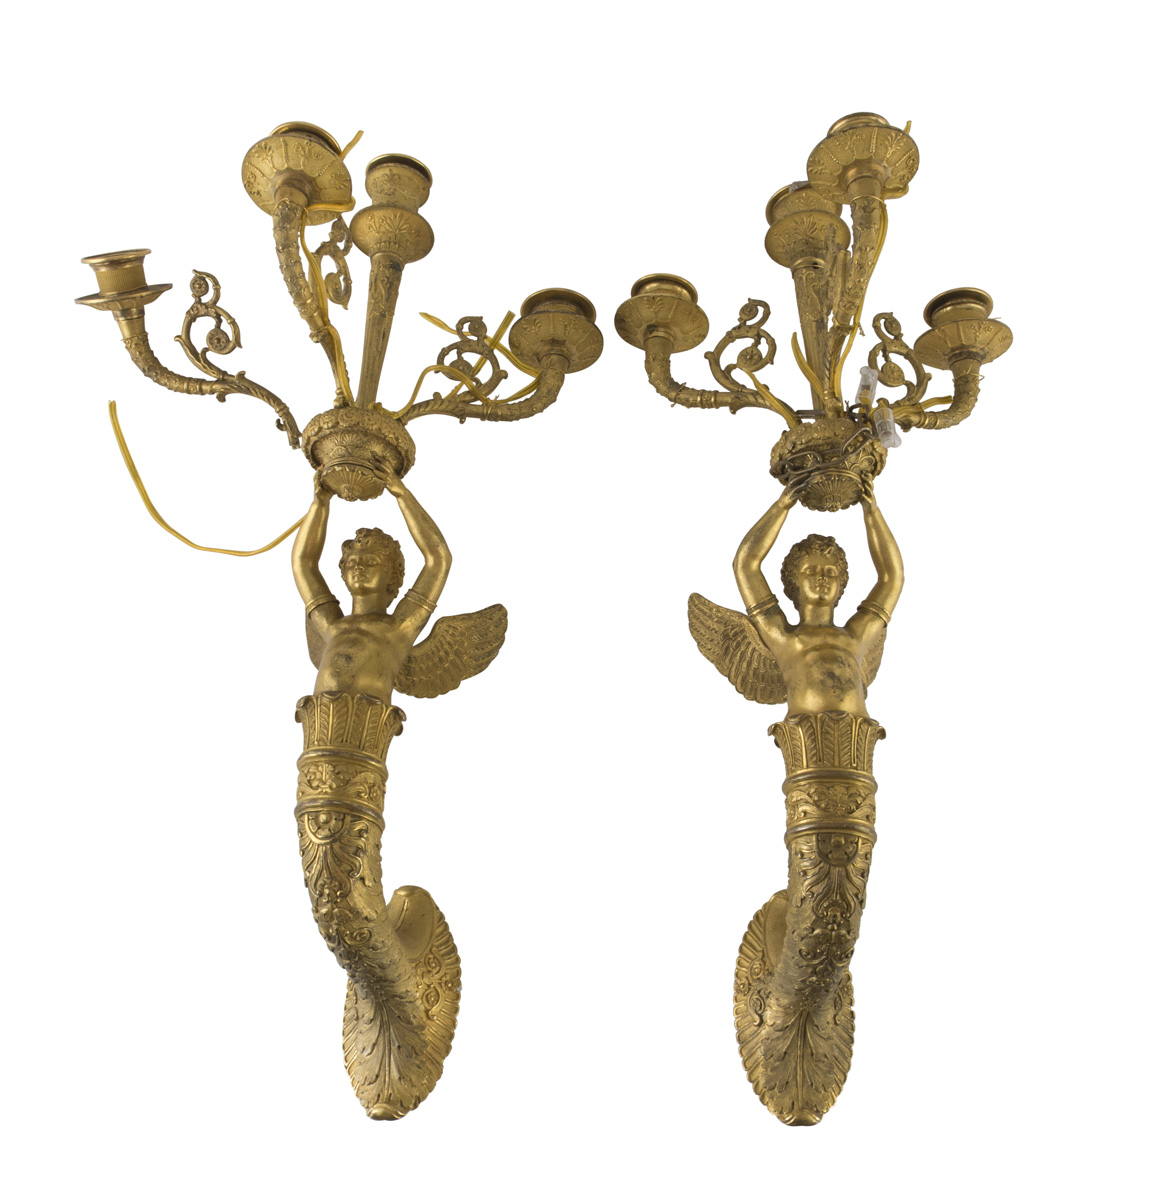 BEAUTIFUL PAIR OF APPLIQUES IN ORMOLU, EMPIRE PERIOD upright with figures of young angels,